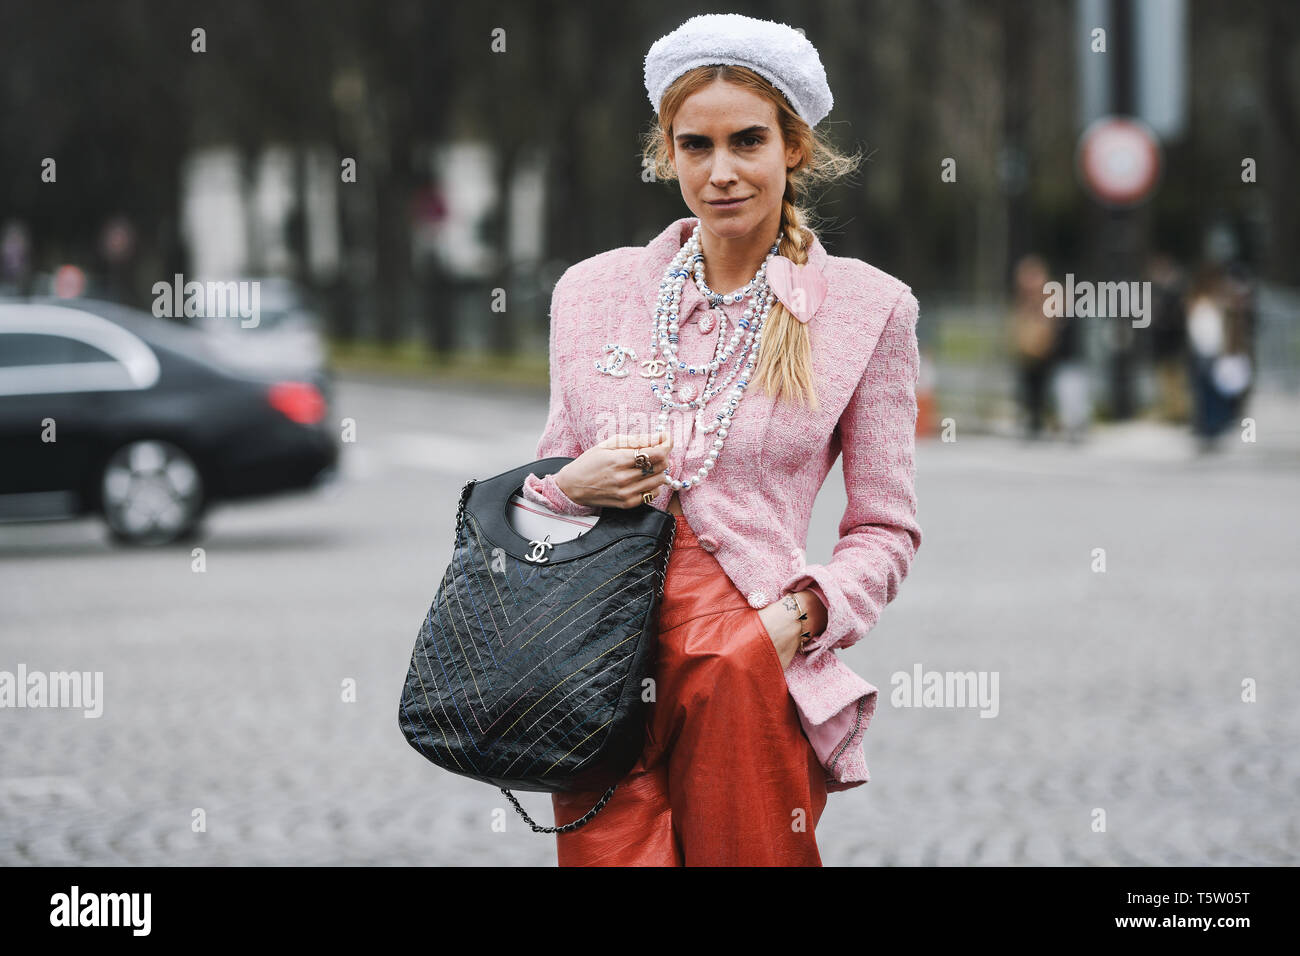 Paris, France - March 5, 2019: Street style outfit -  Blanca Miro before a fashion show during Paris Fashion Week - PFWFW19 Stock Photo